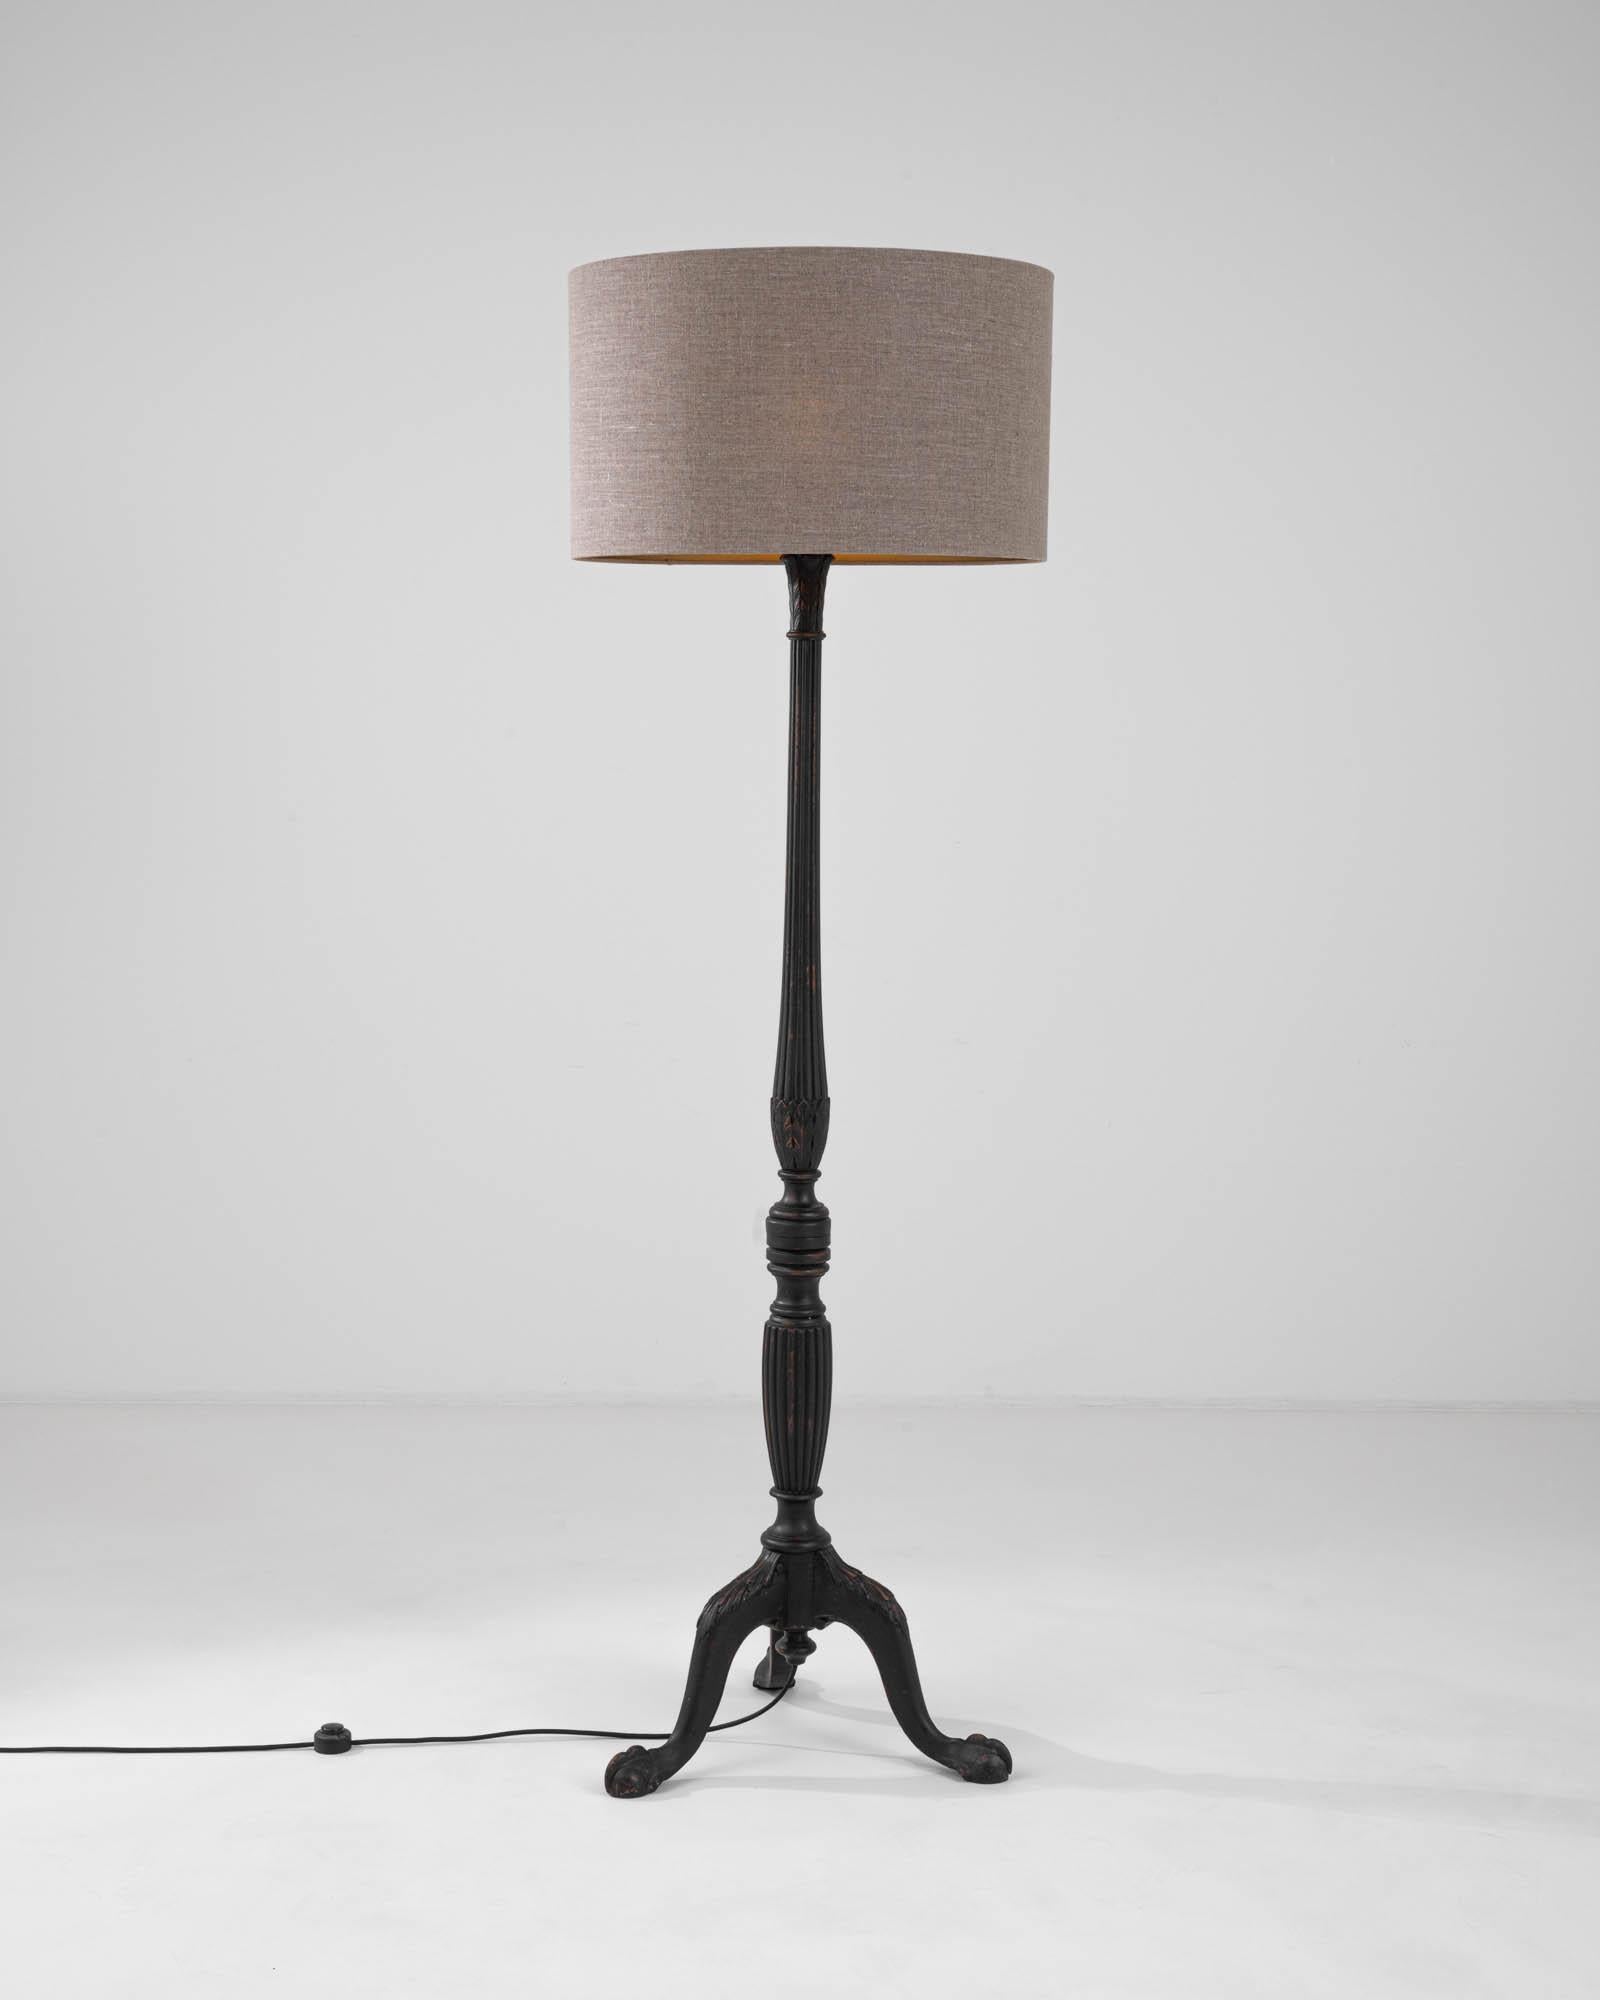 Introducing the 19th Century French Wooden Floor Lamp, a stunning embodiment of timeless design and elegance. The lamp's stand, with its intricately carved details, tells a tale of expert craftsmanship and classic beauty. A subtle yet dignified